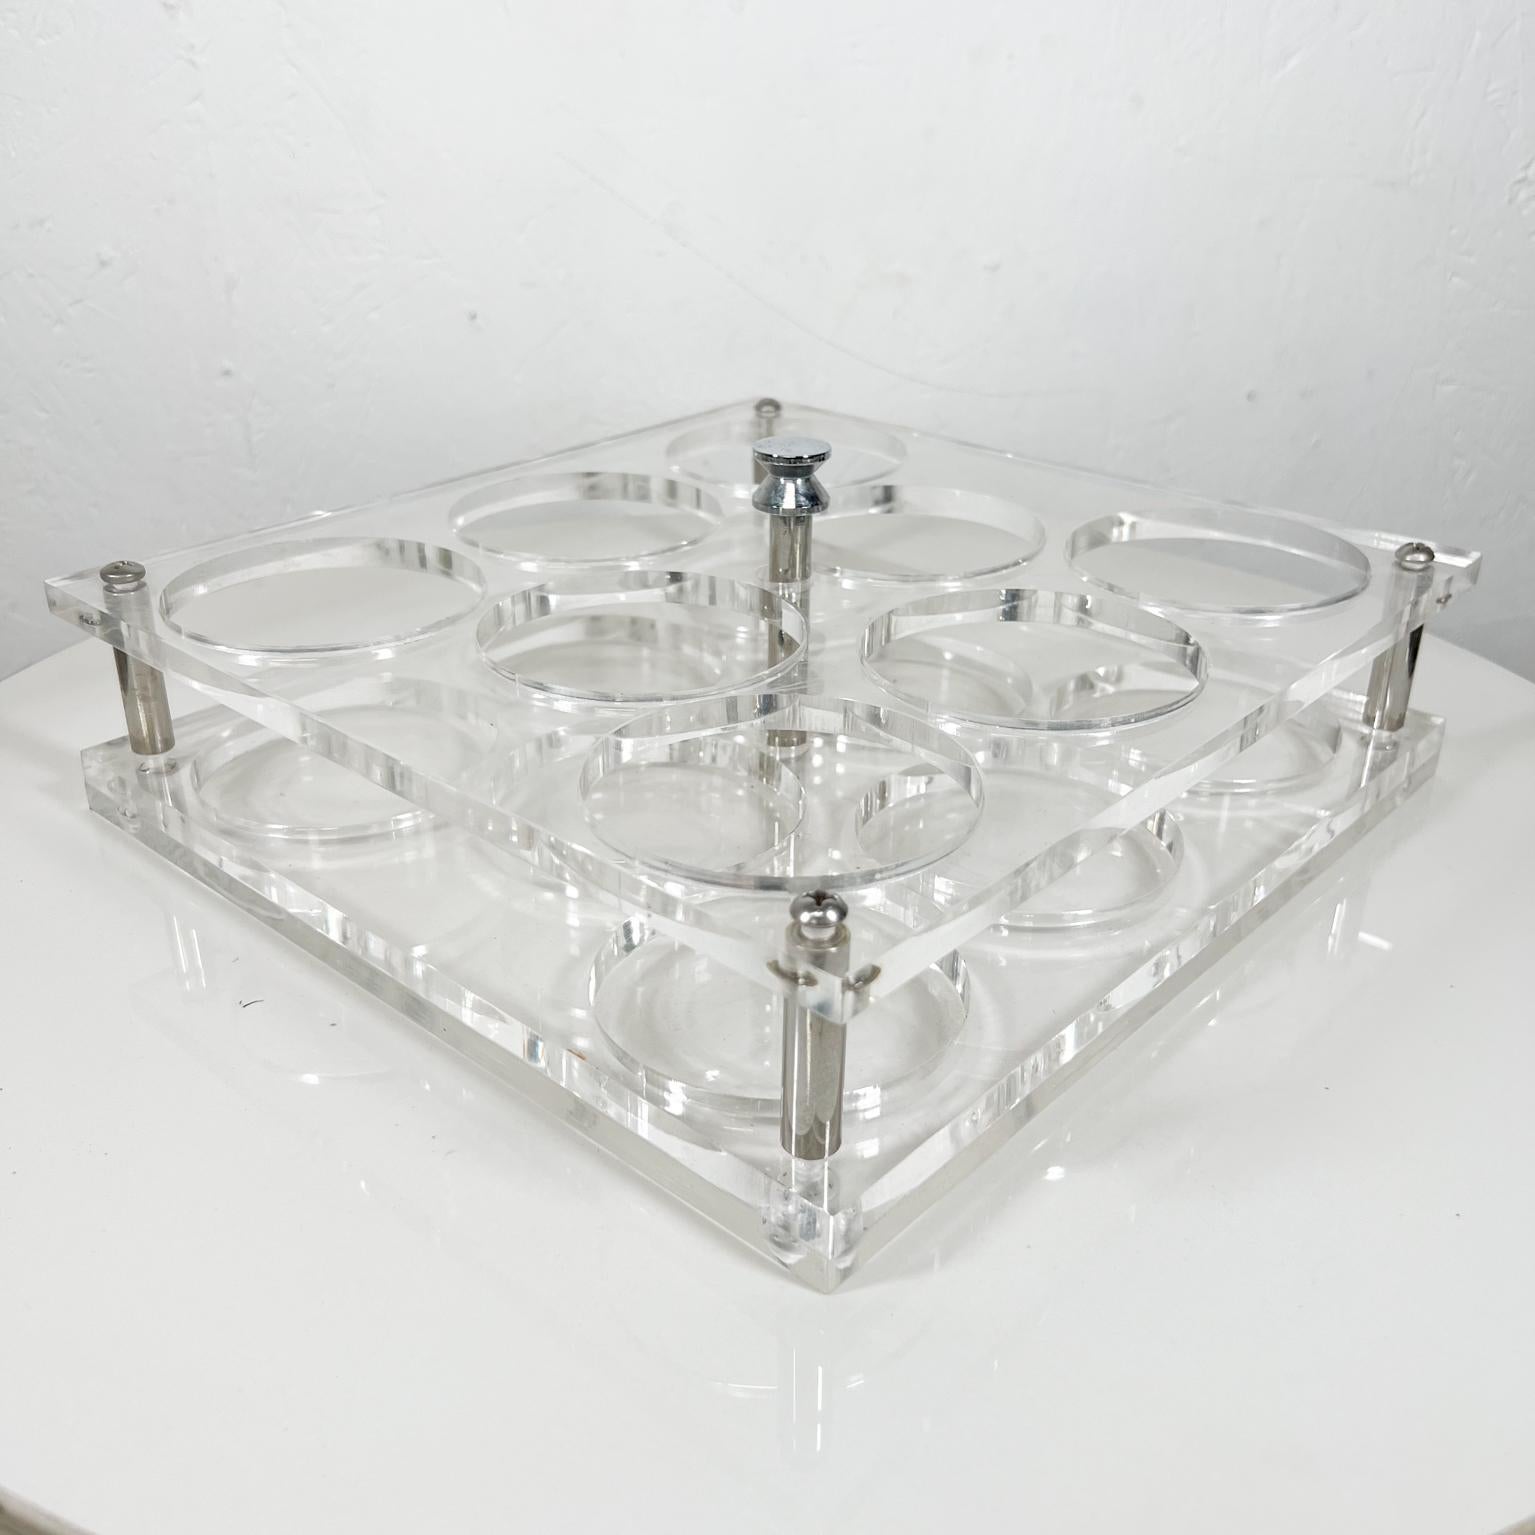 Late 20th Century 1970s Modernist Lucite Beverage Bar Drink Carrier Eight Glass Serving Tray